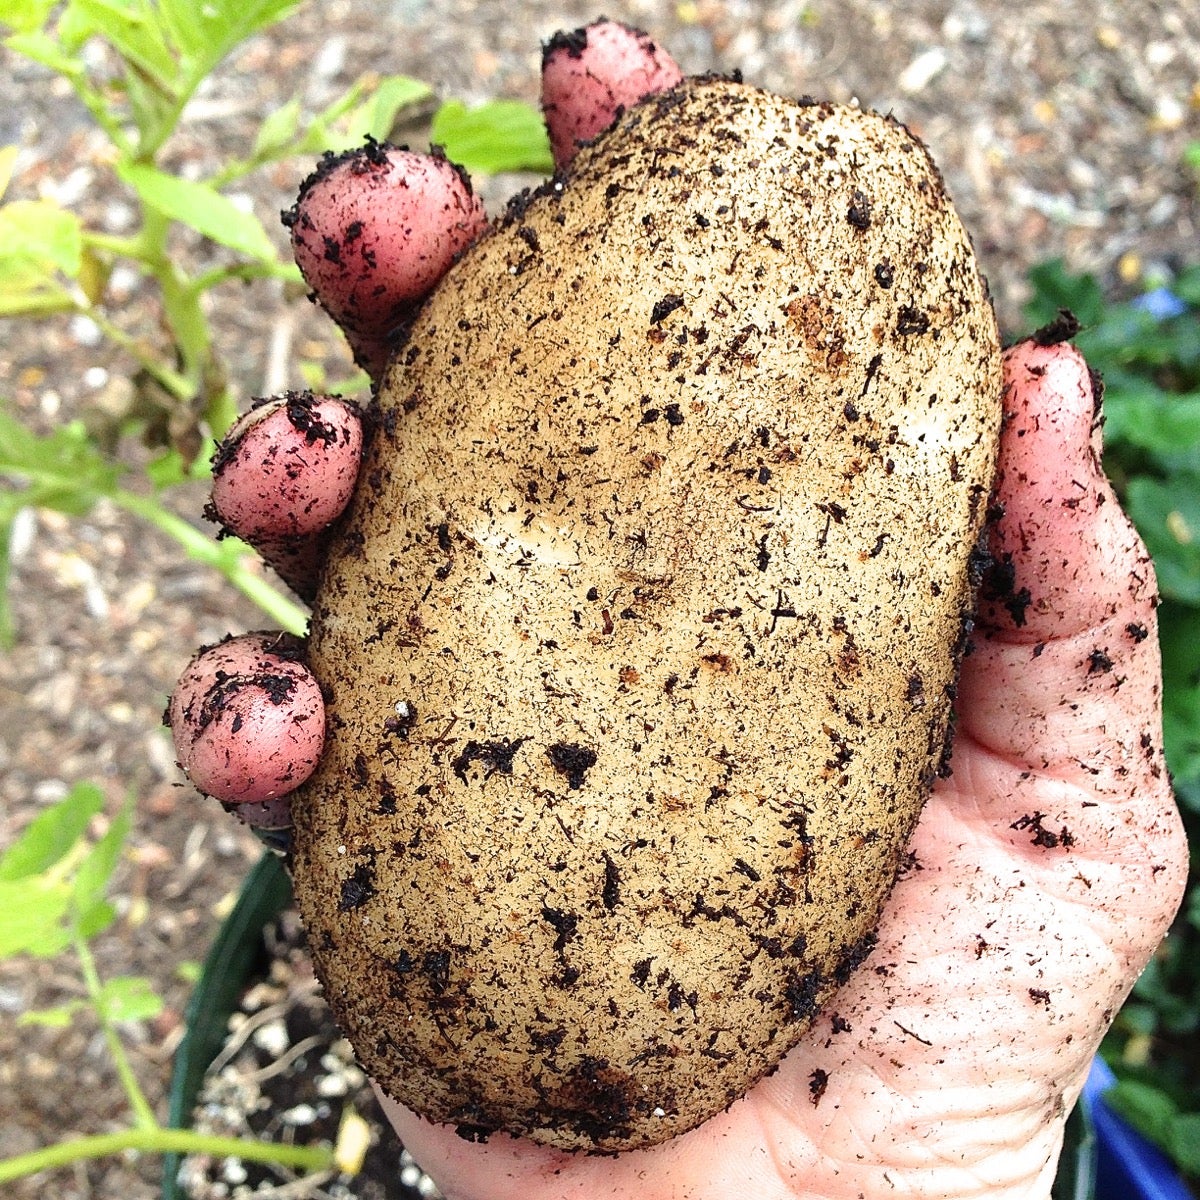 Hand holding just-harvested potato, still covered in dirt.